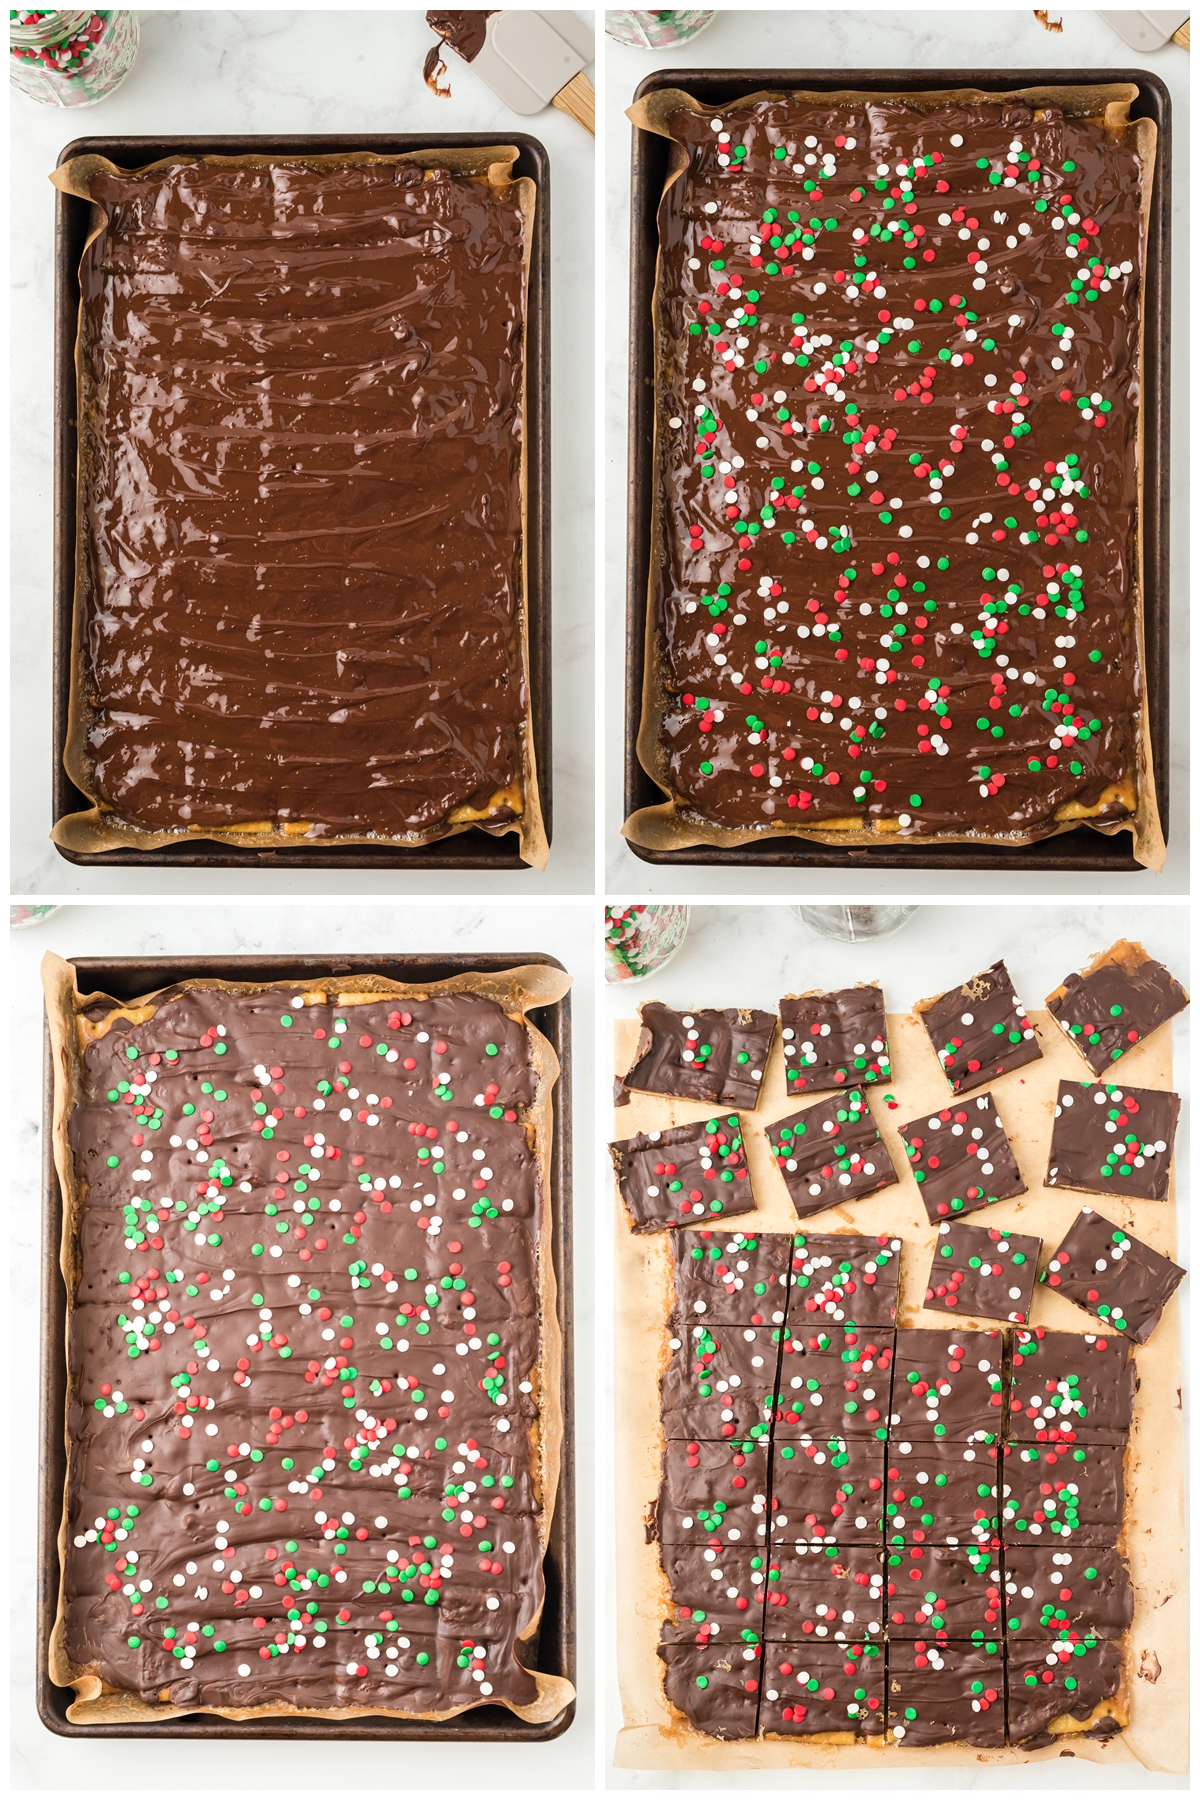 Step by step process of making Christmas crack